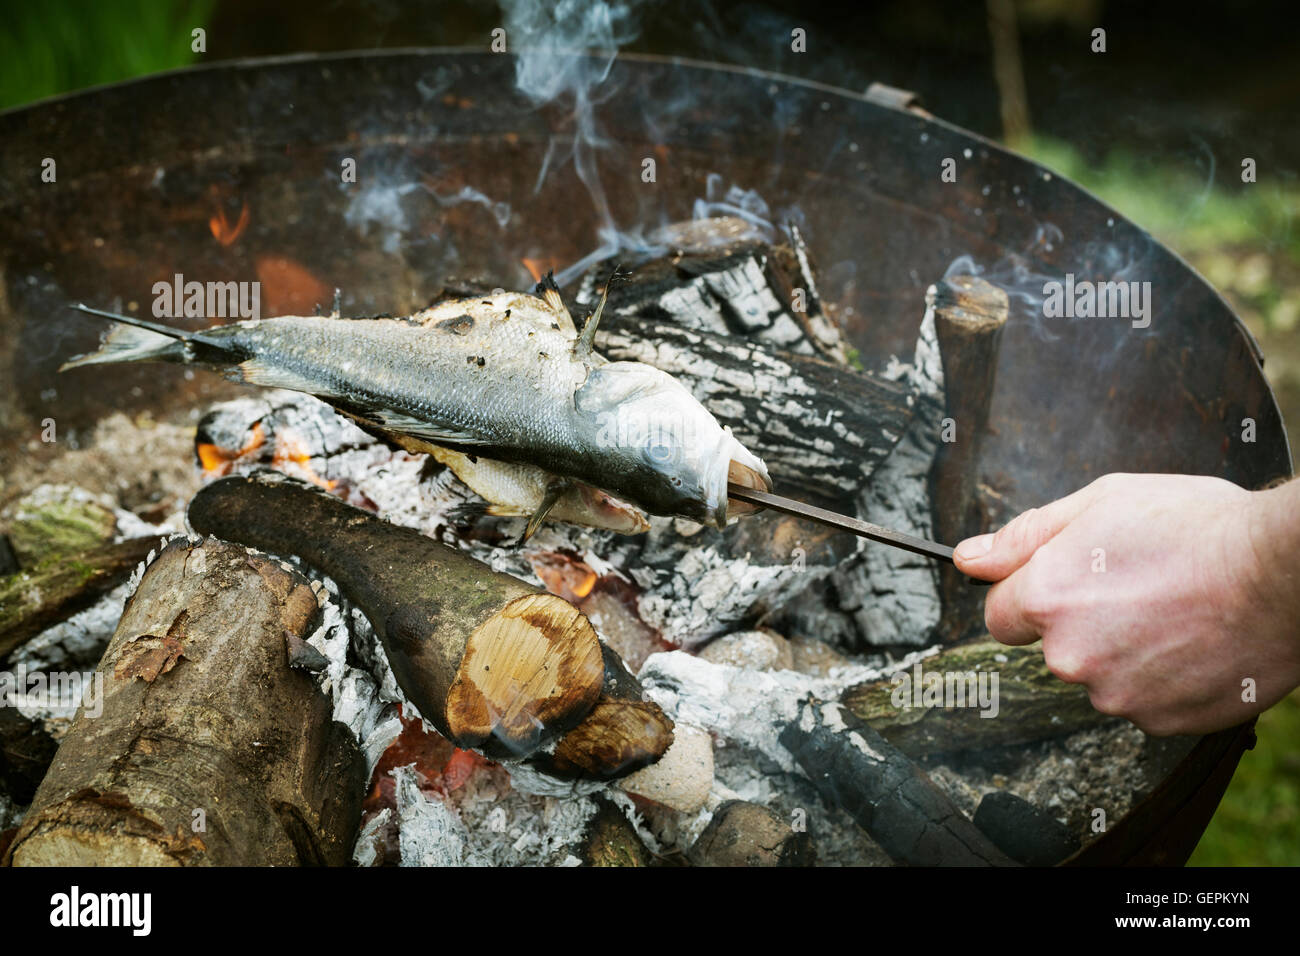 Chef grilling a whole fish on a barbecue. Stock Photo